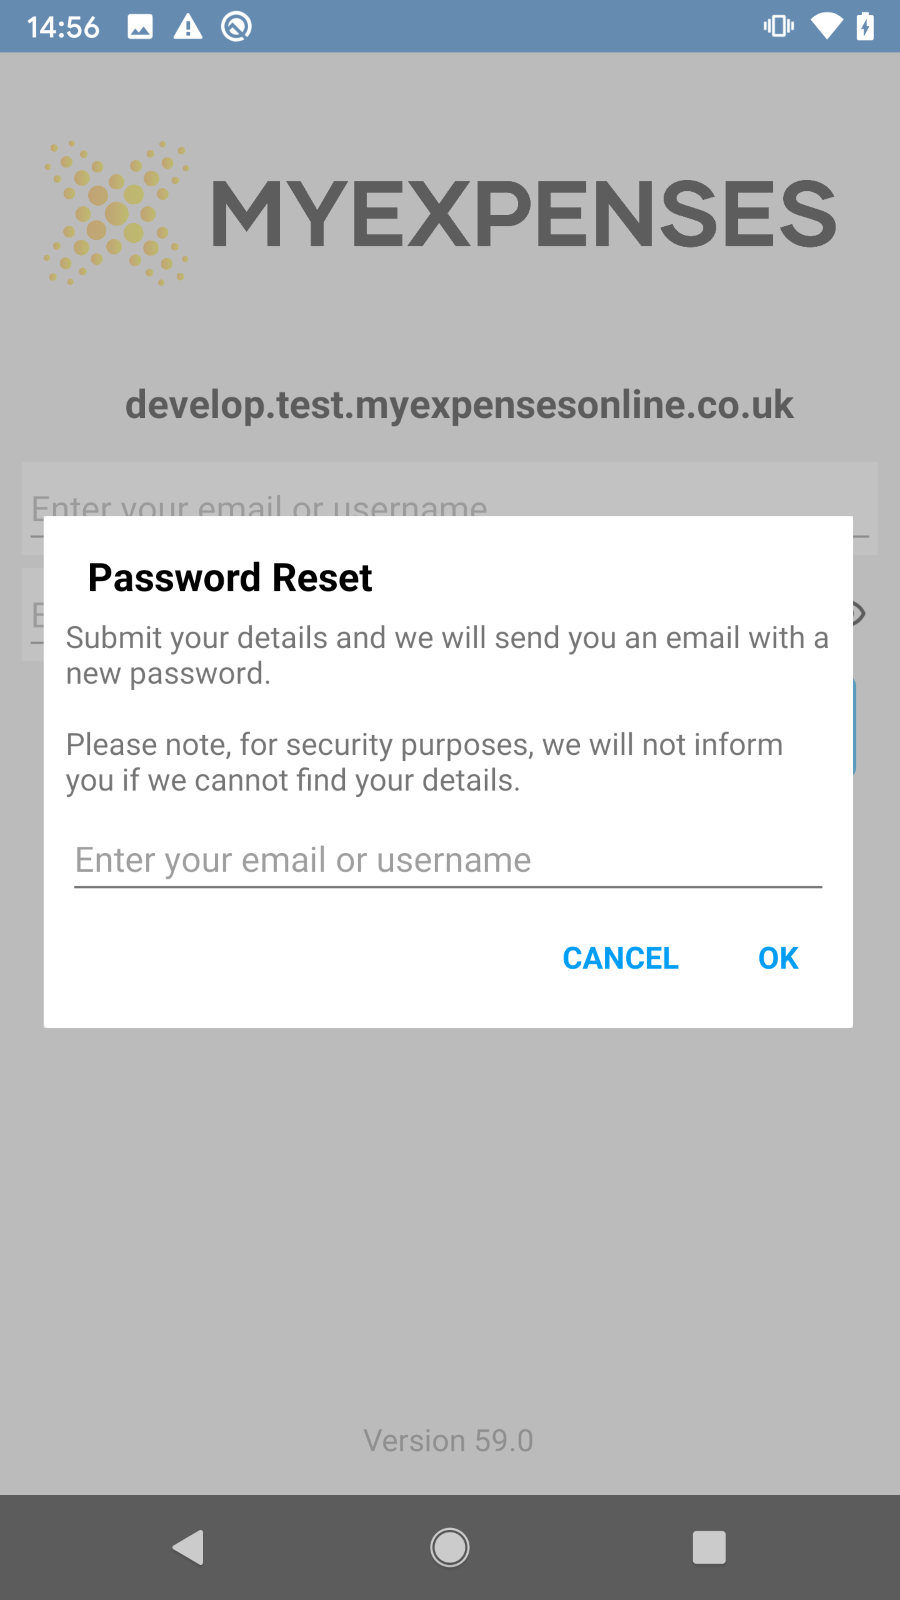 A screenshot of a password reset

Description automatically generated with medium confidence